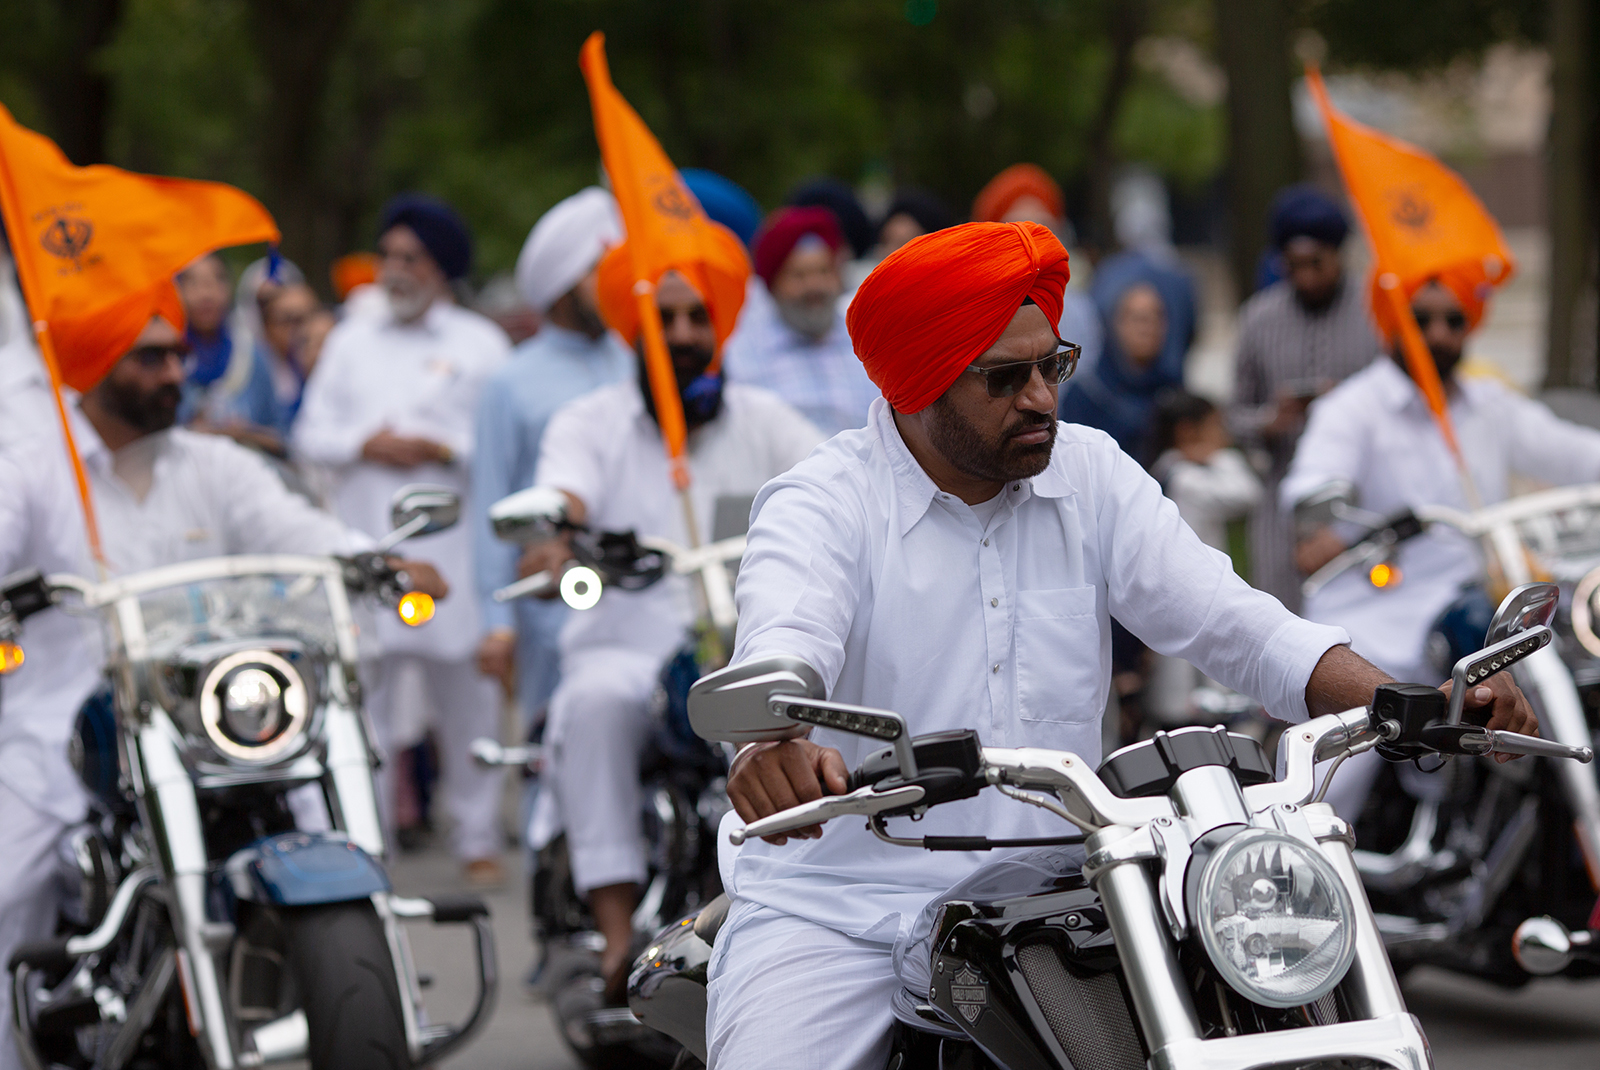 Sikh motorcyclists participate in the Parade of Faiths in Chicago on Aug. 13, 2023. The parade preceded the Parliament of the World's Religions, which began August 14. Photo by Lauren Pond for RNS